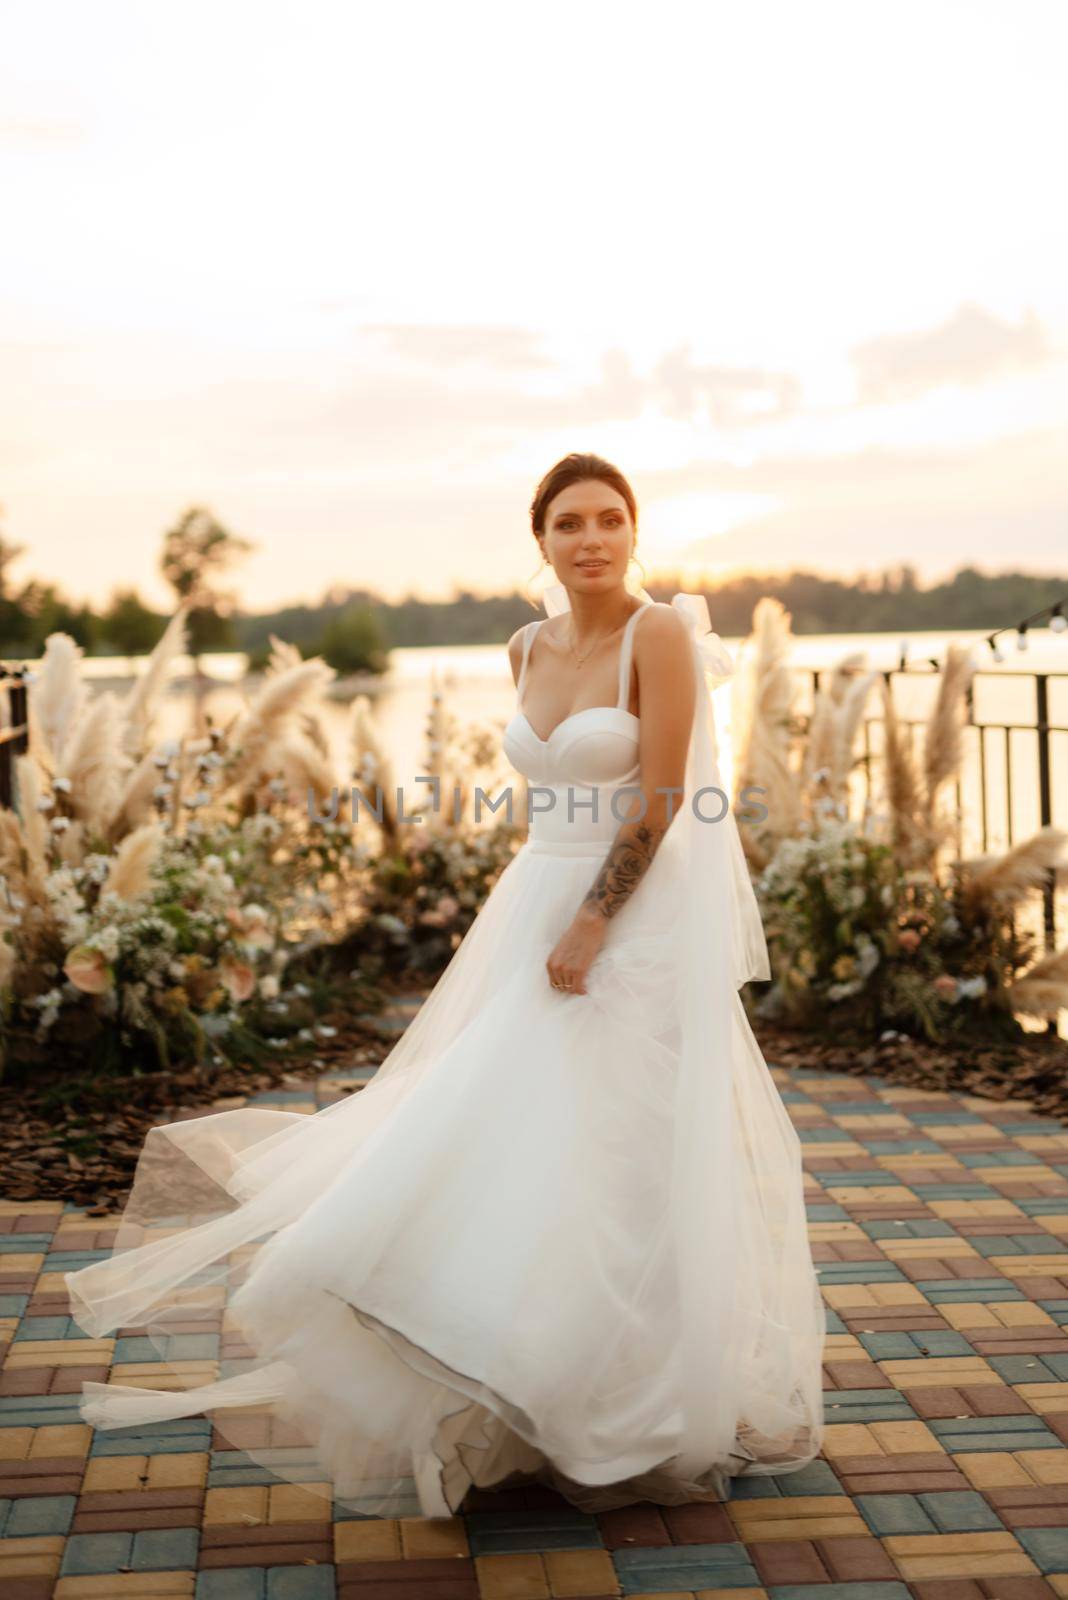 bride against the background of a yellow sunset on a pier near the river